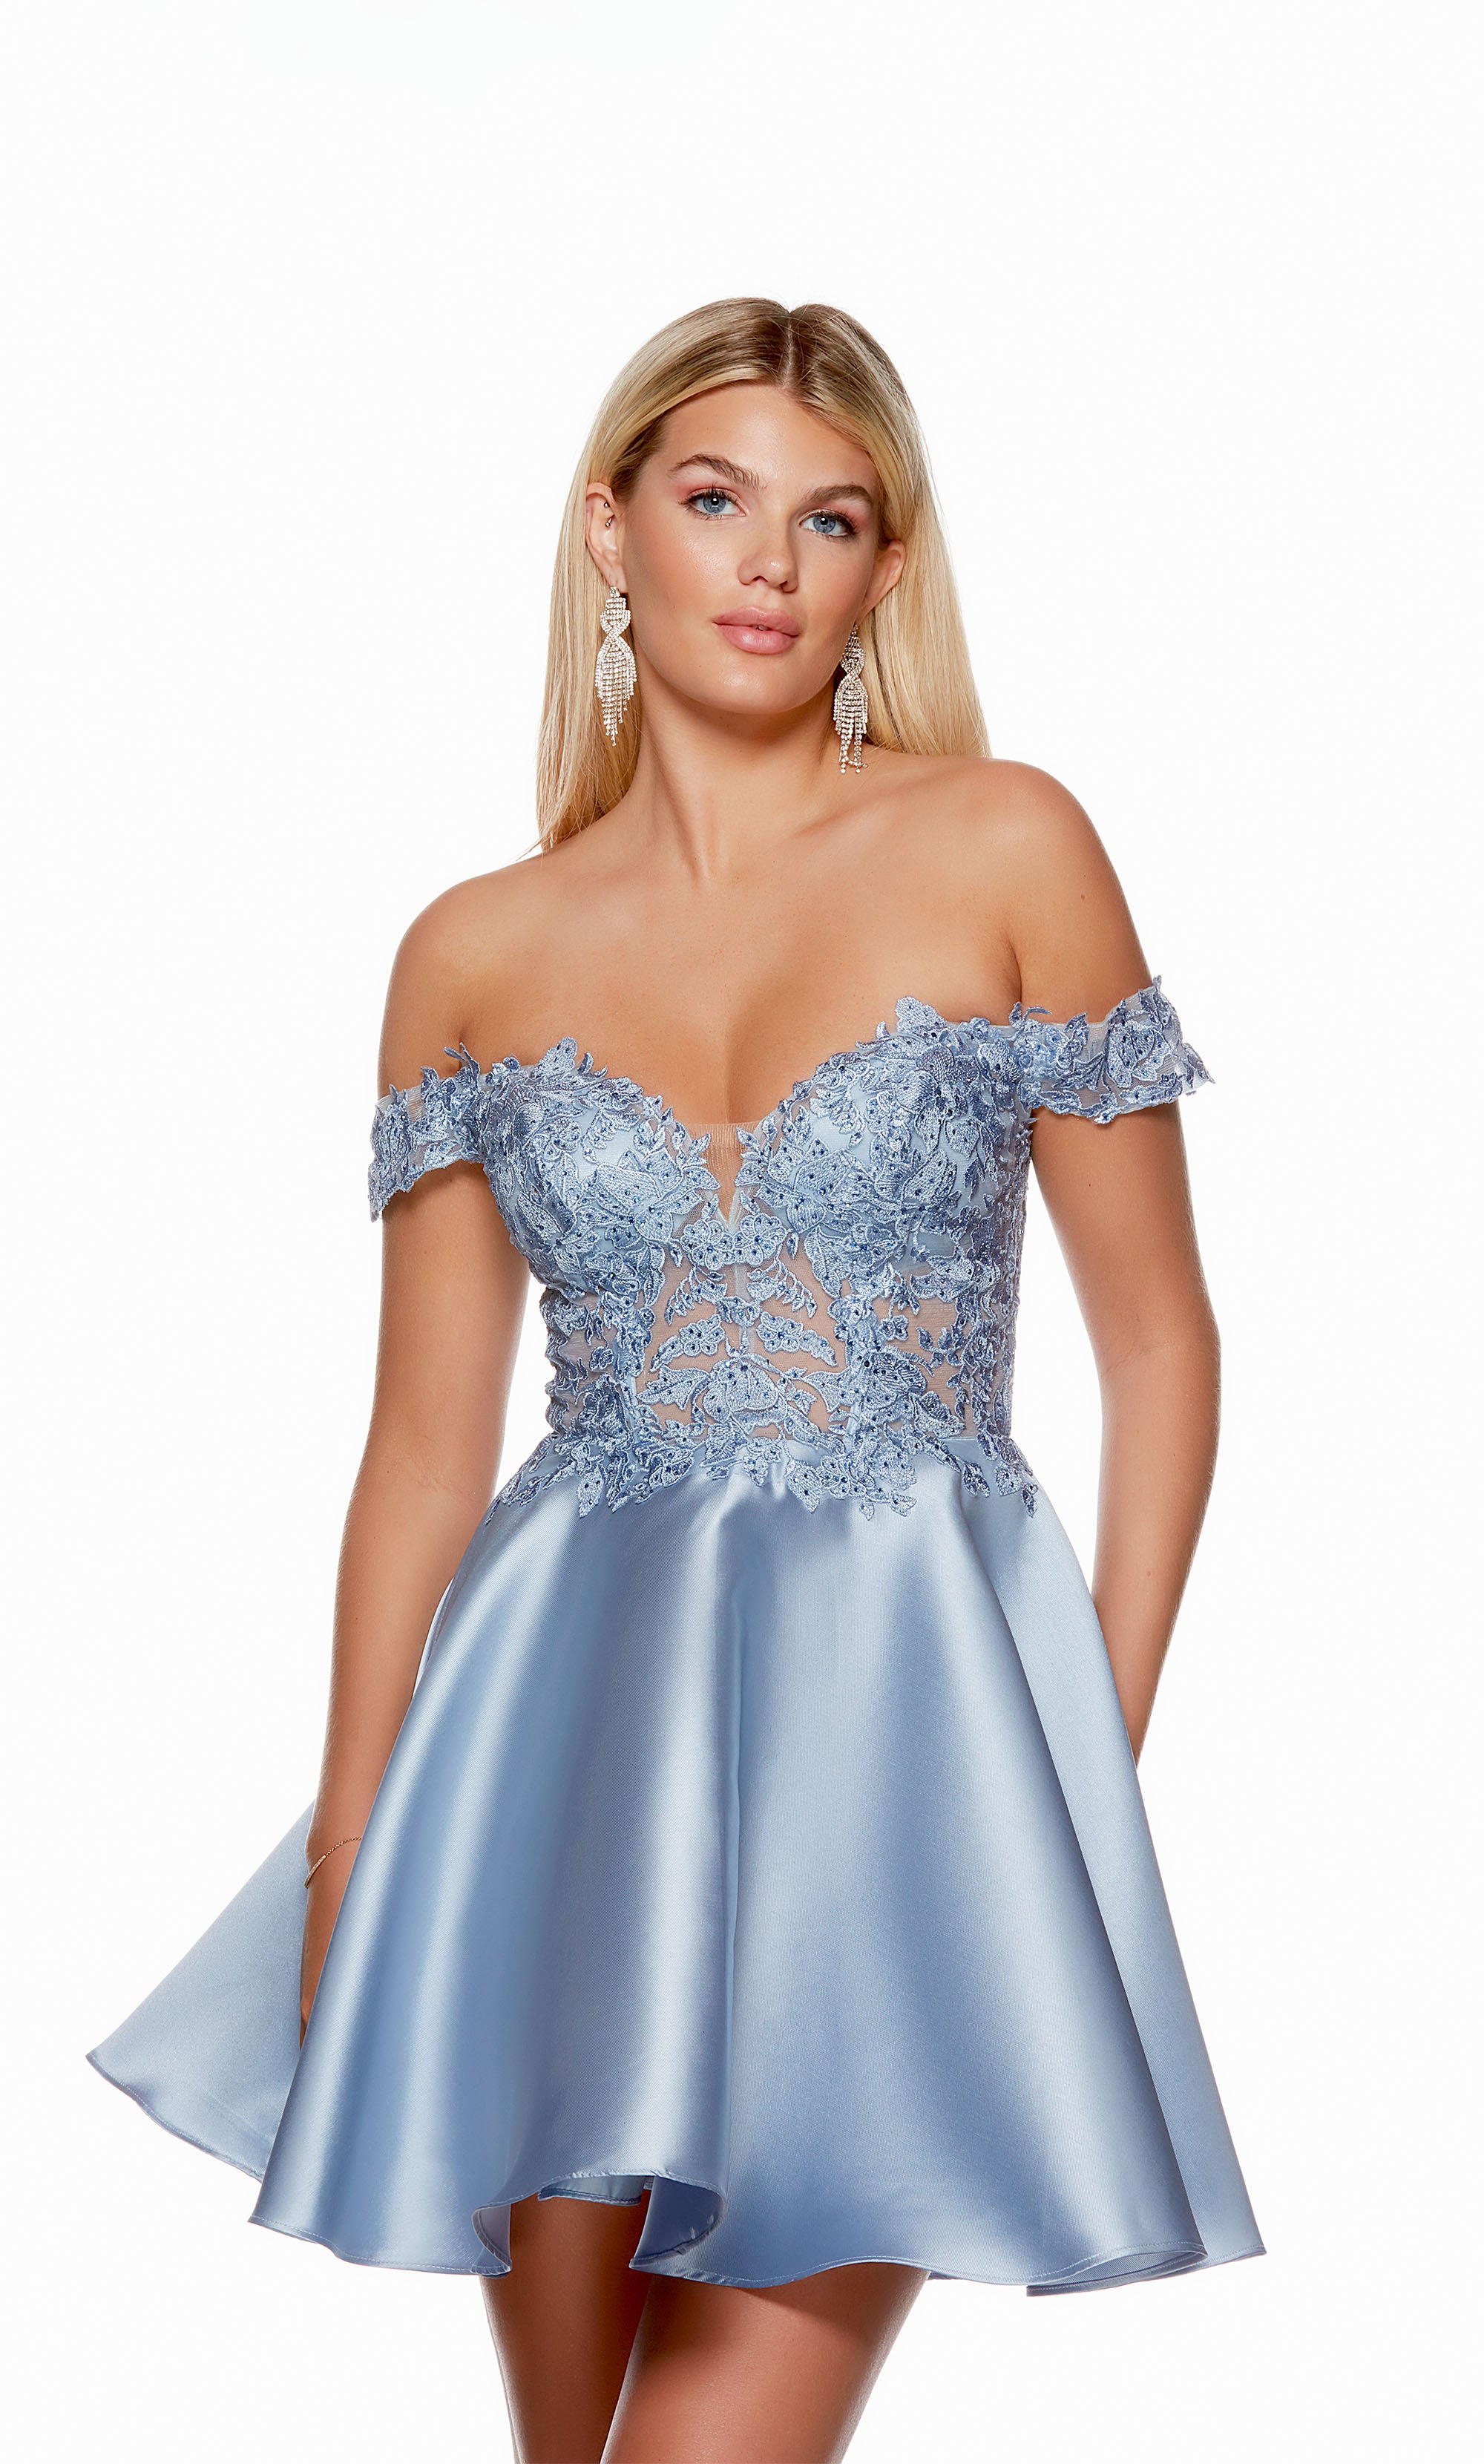 A Mikado flare dress with an off-the-shoulder neckline and sheer corset bodice adorned with floral lace appliques in the color french blue.